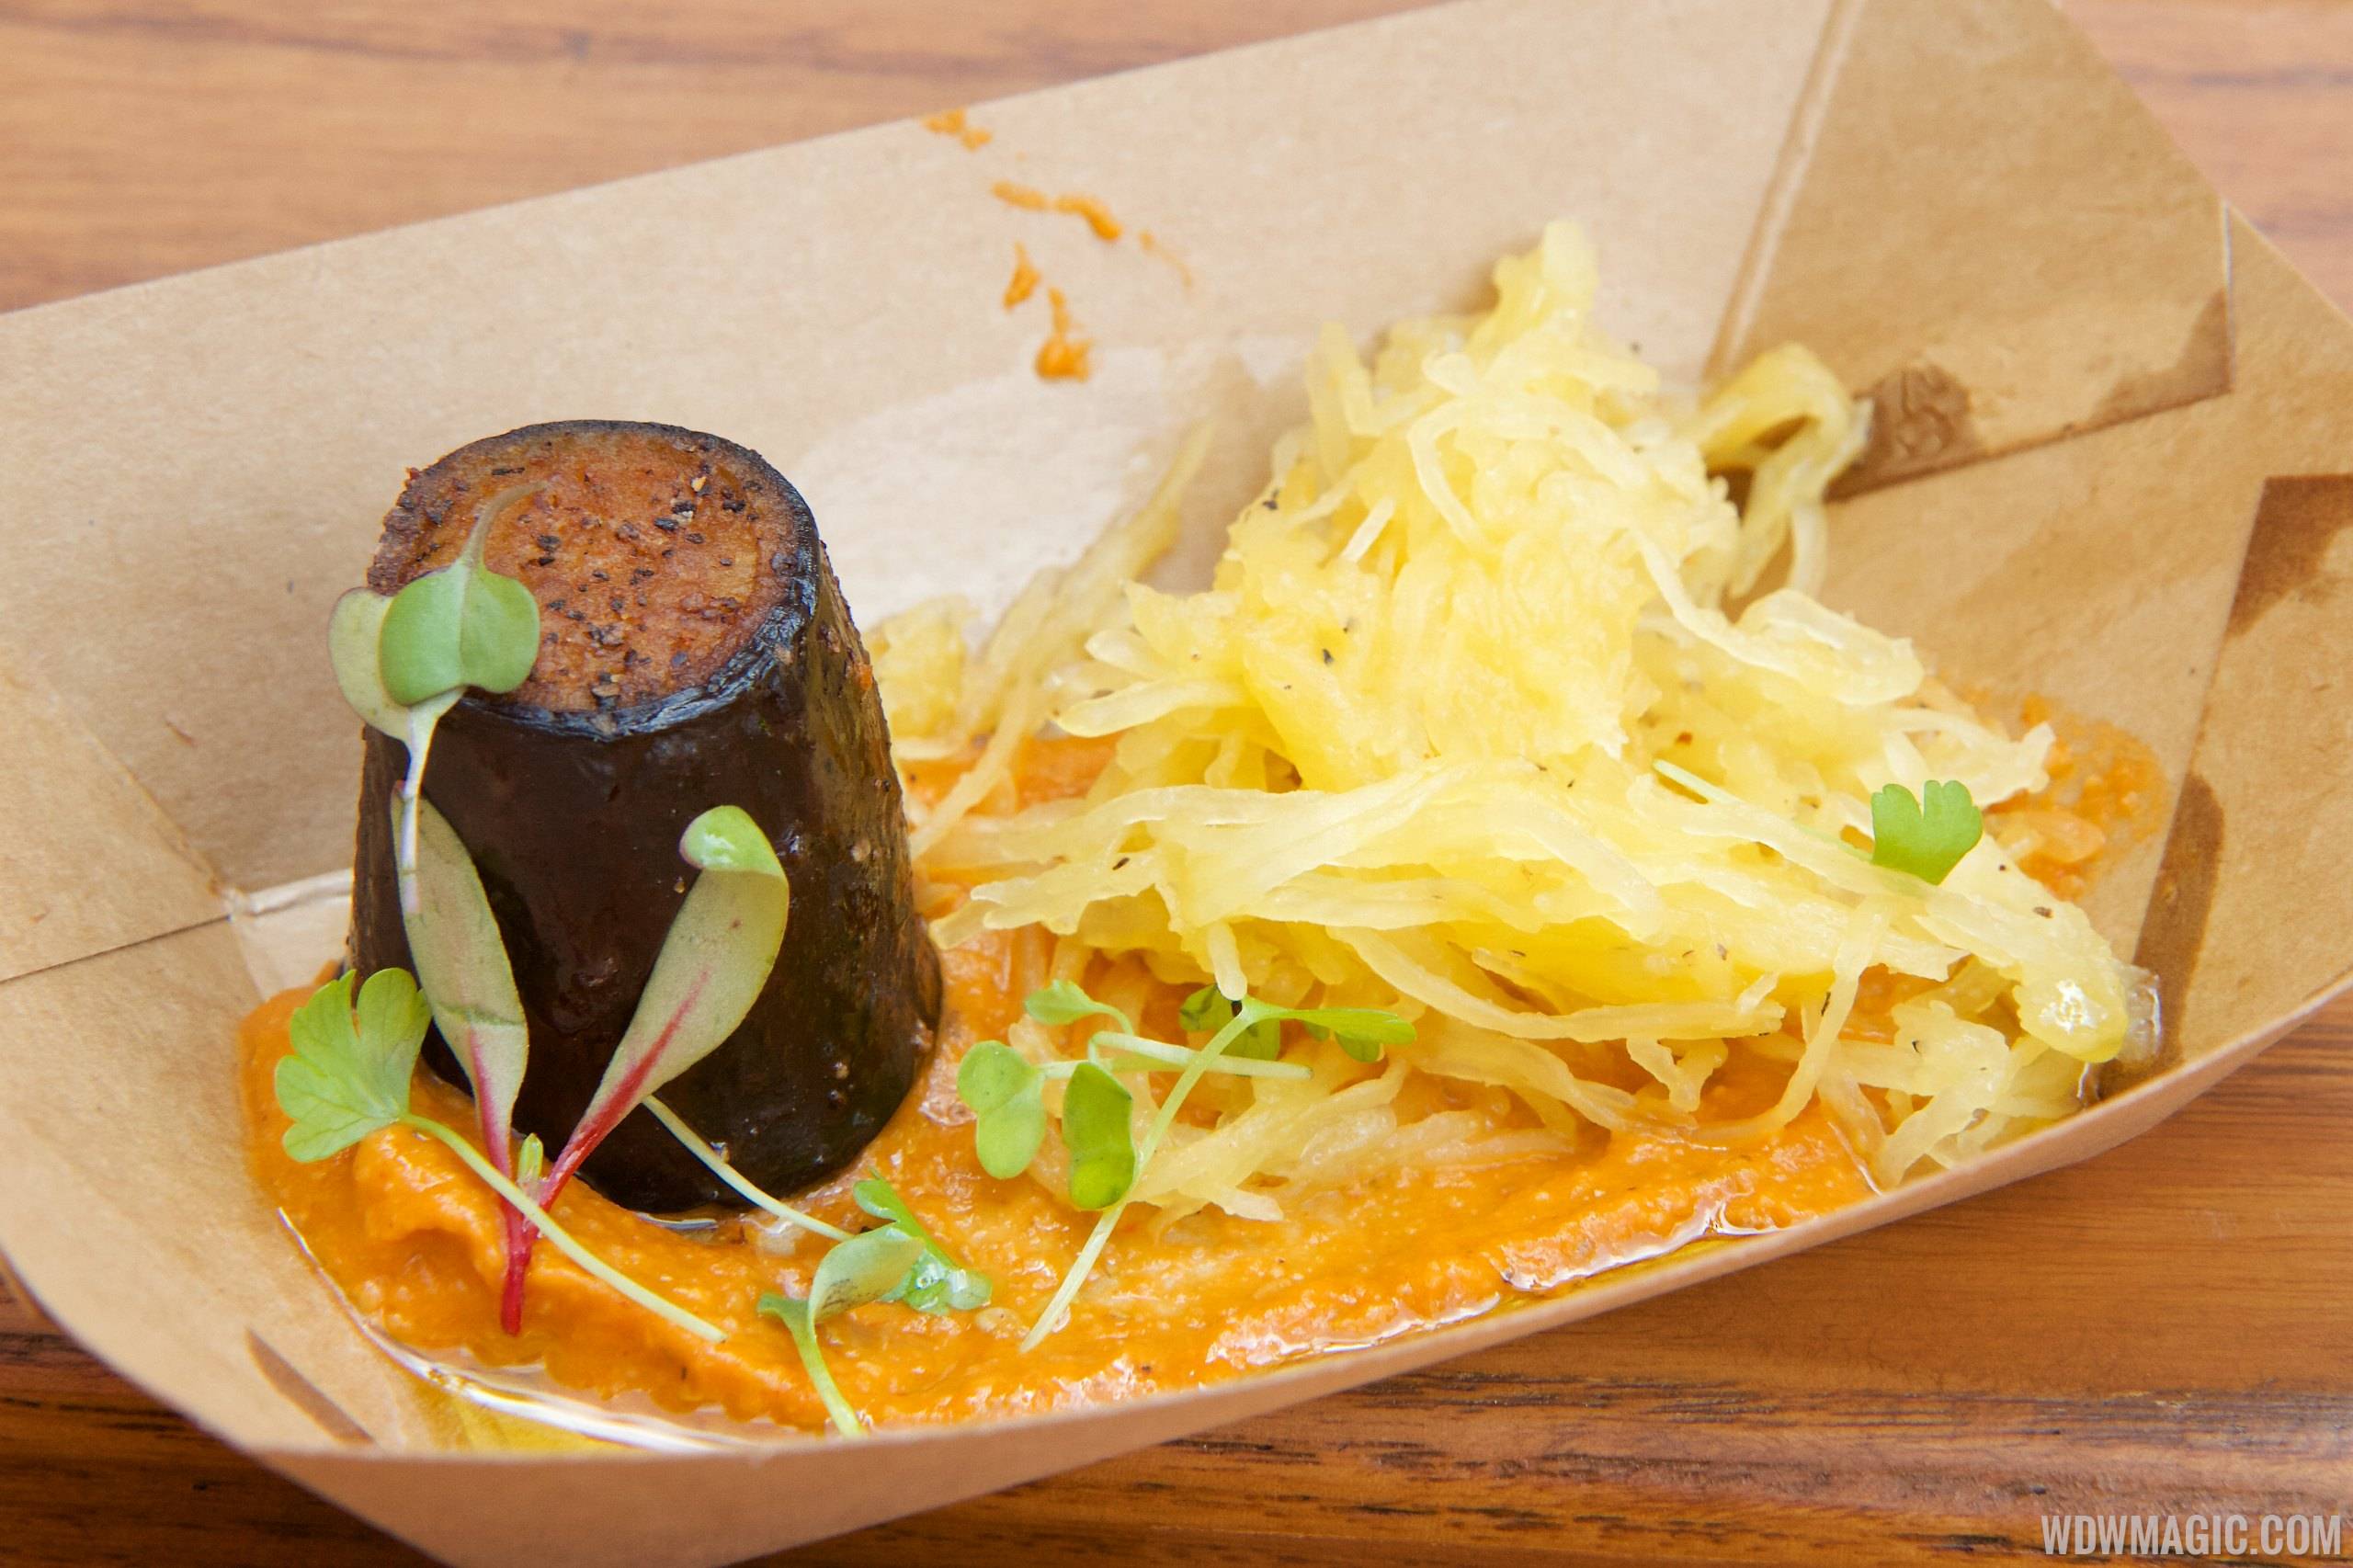 2014 Epcot Flower and Garden Festival Outdoor Kitchen - Urban Farm Eats - Land-grown eggplant scallop with squash